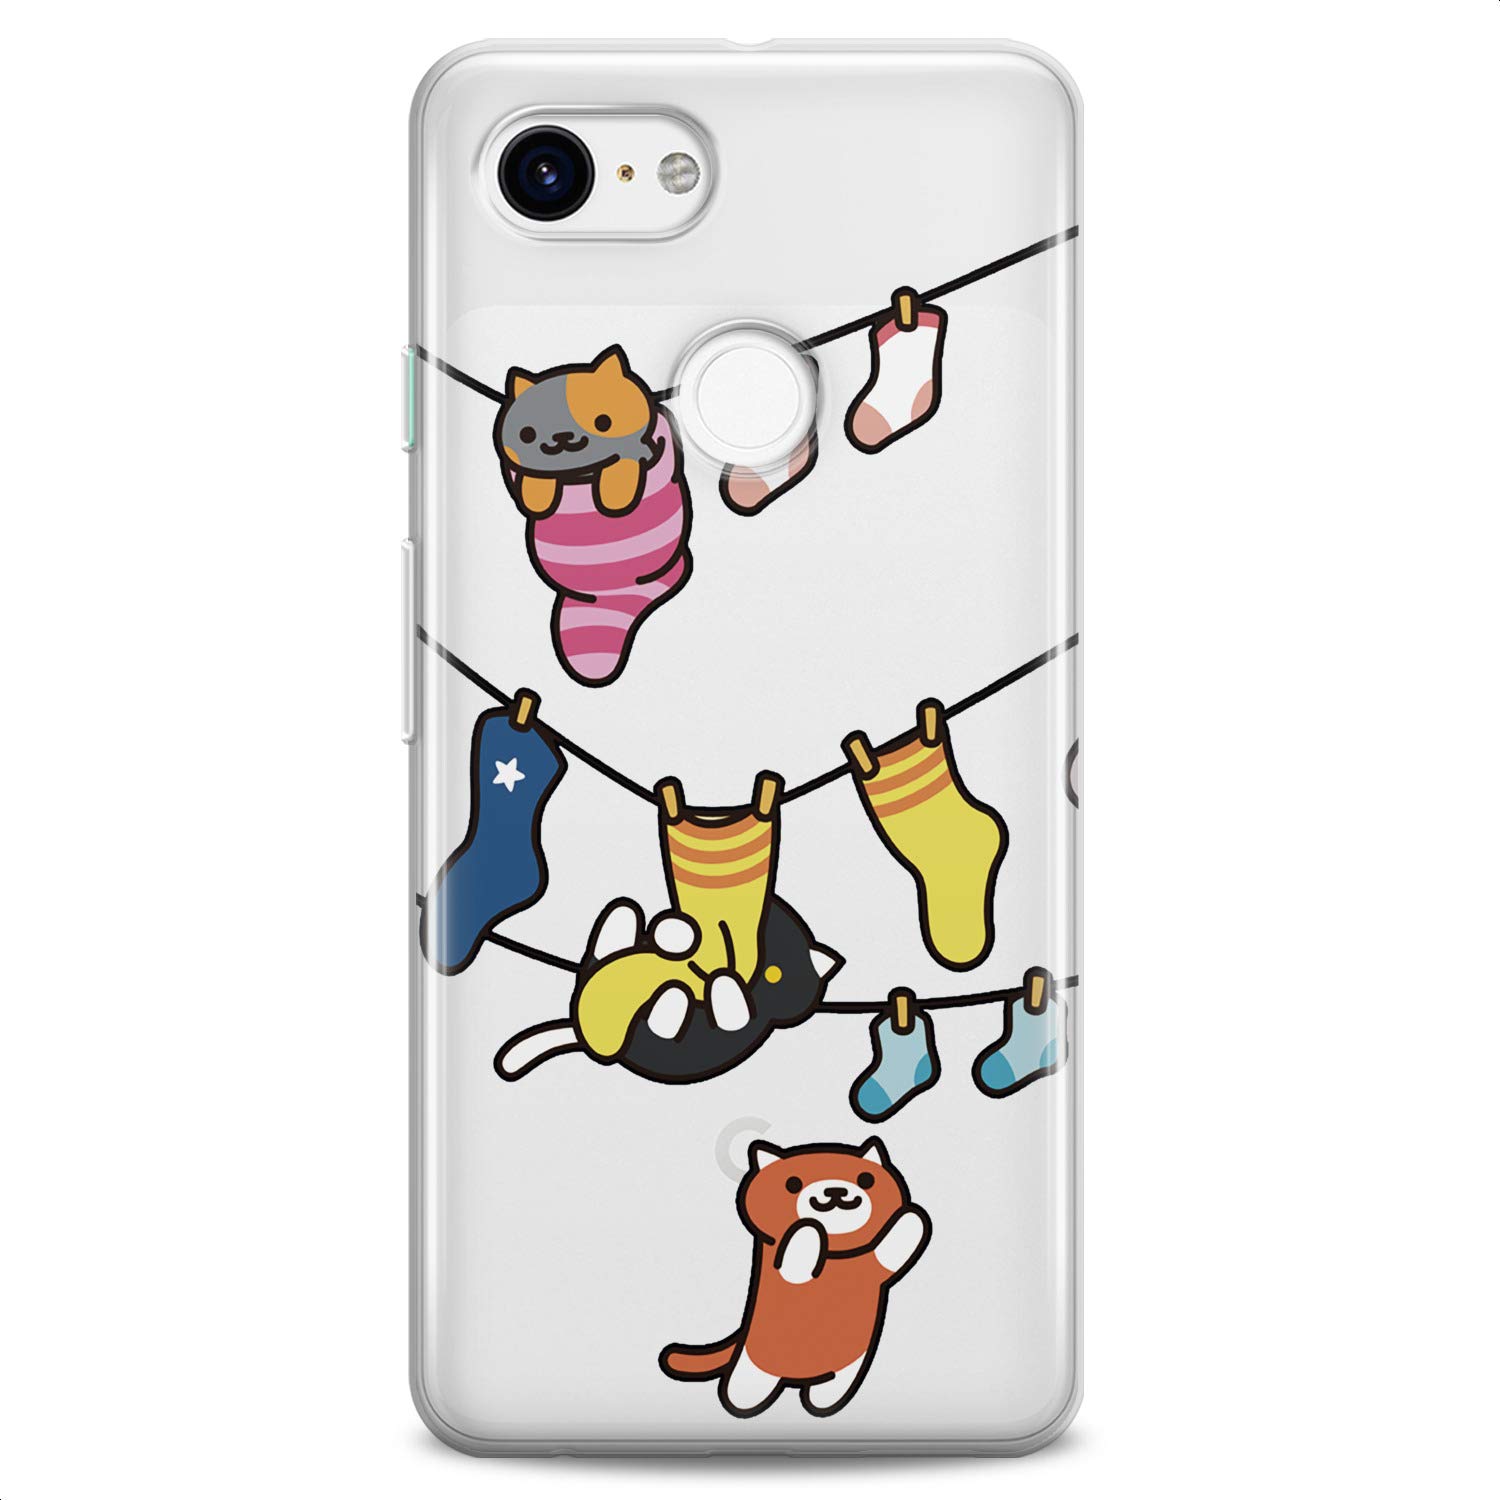 Cavka TPU Case Replacement for Google Pixel 7 6a Pro 5a XL 4a 5G 2 XL 3 XL 3a XL 4 Girls Clear Colored Kitties Design Print Teen Animal Theme Cute Yellow Cats Flexible Silicone Slim fit Soft Funny